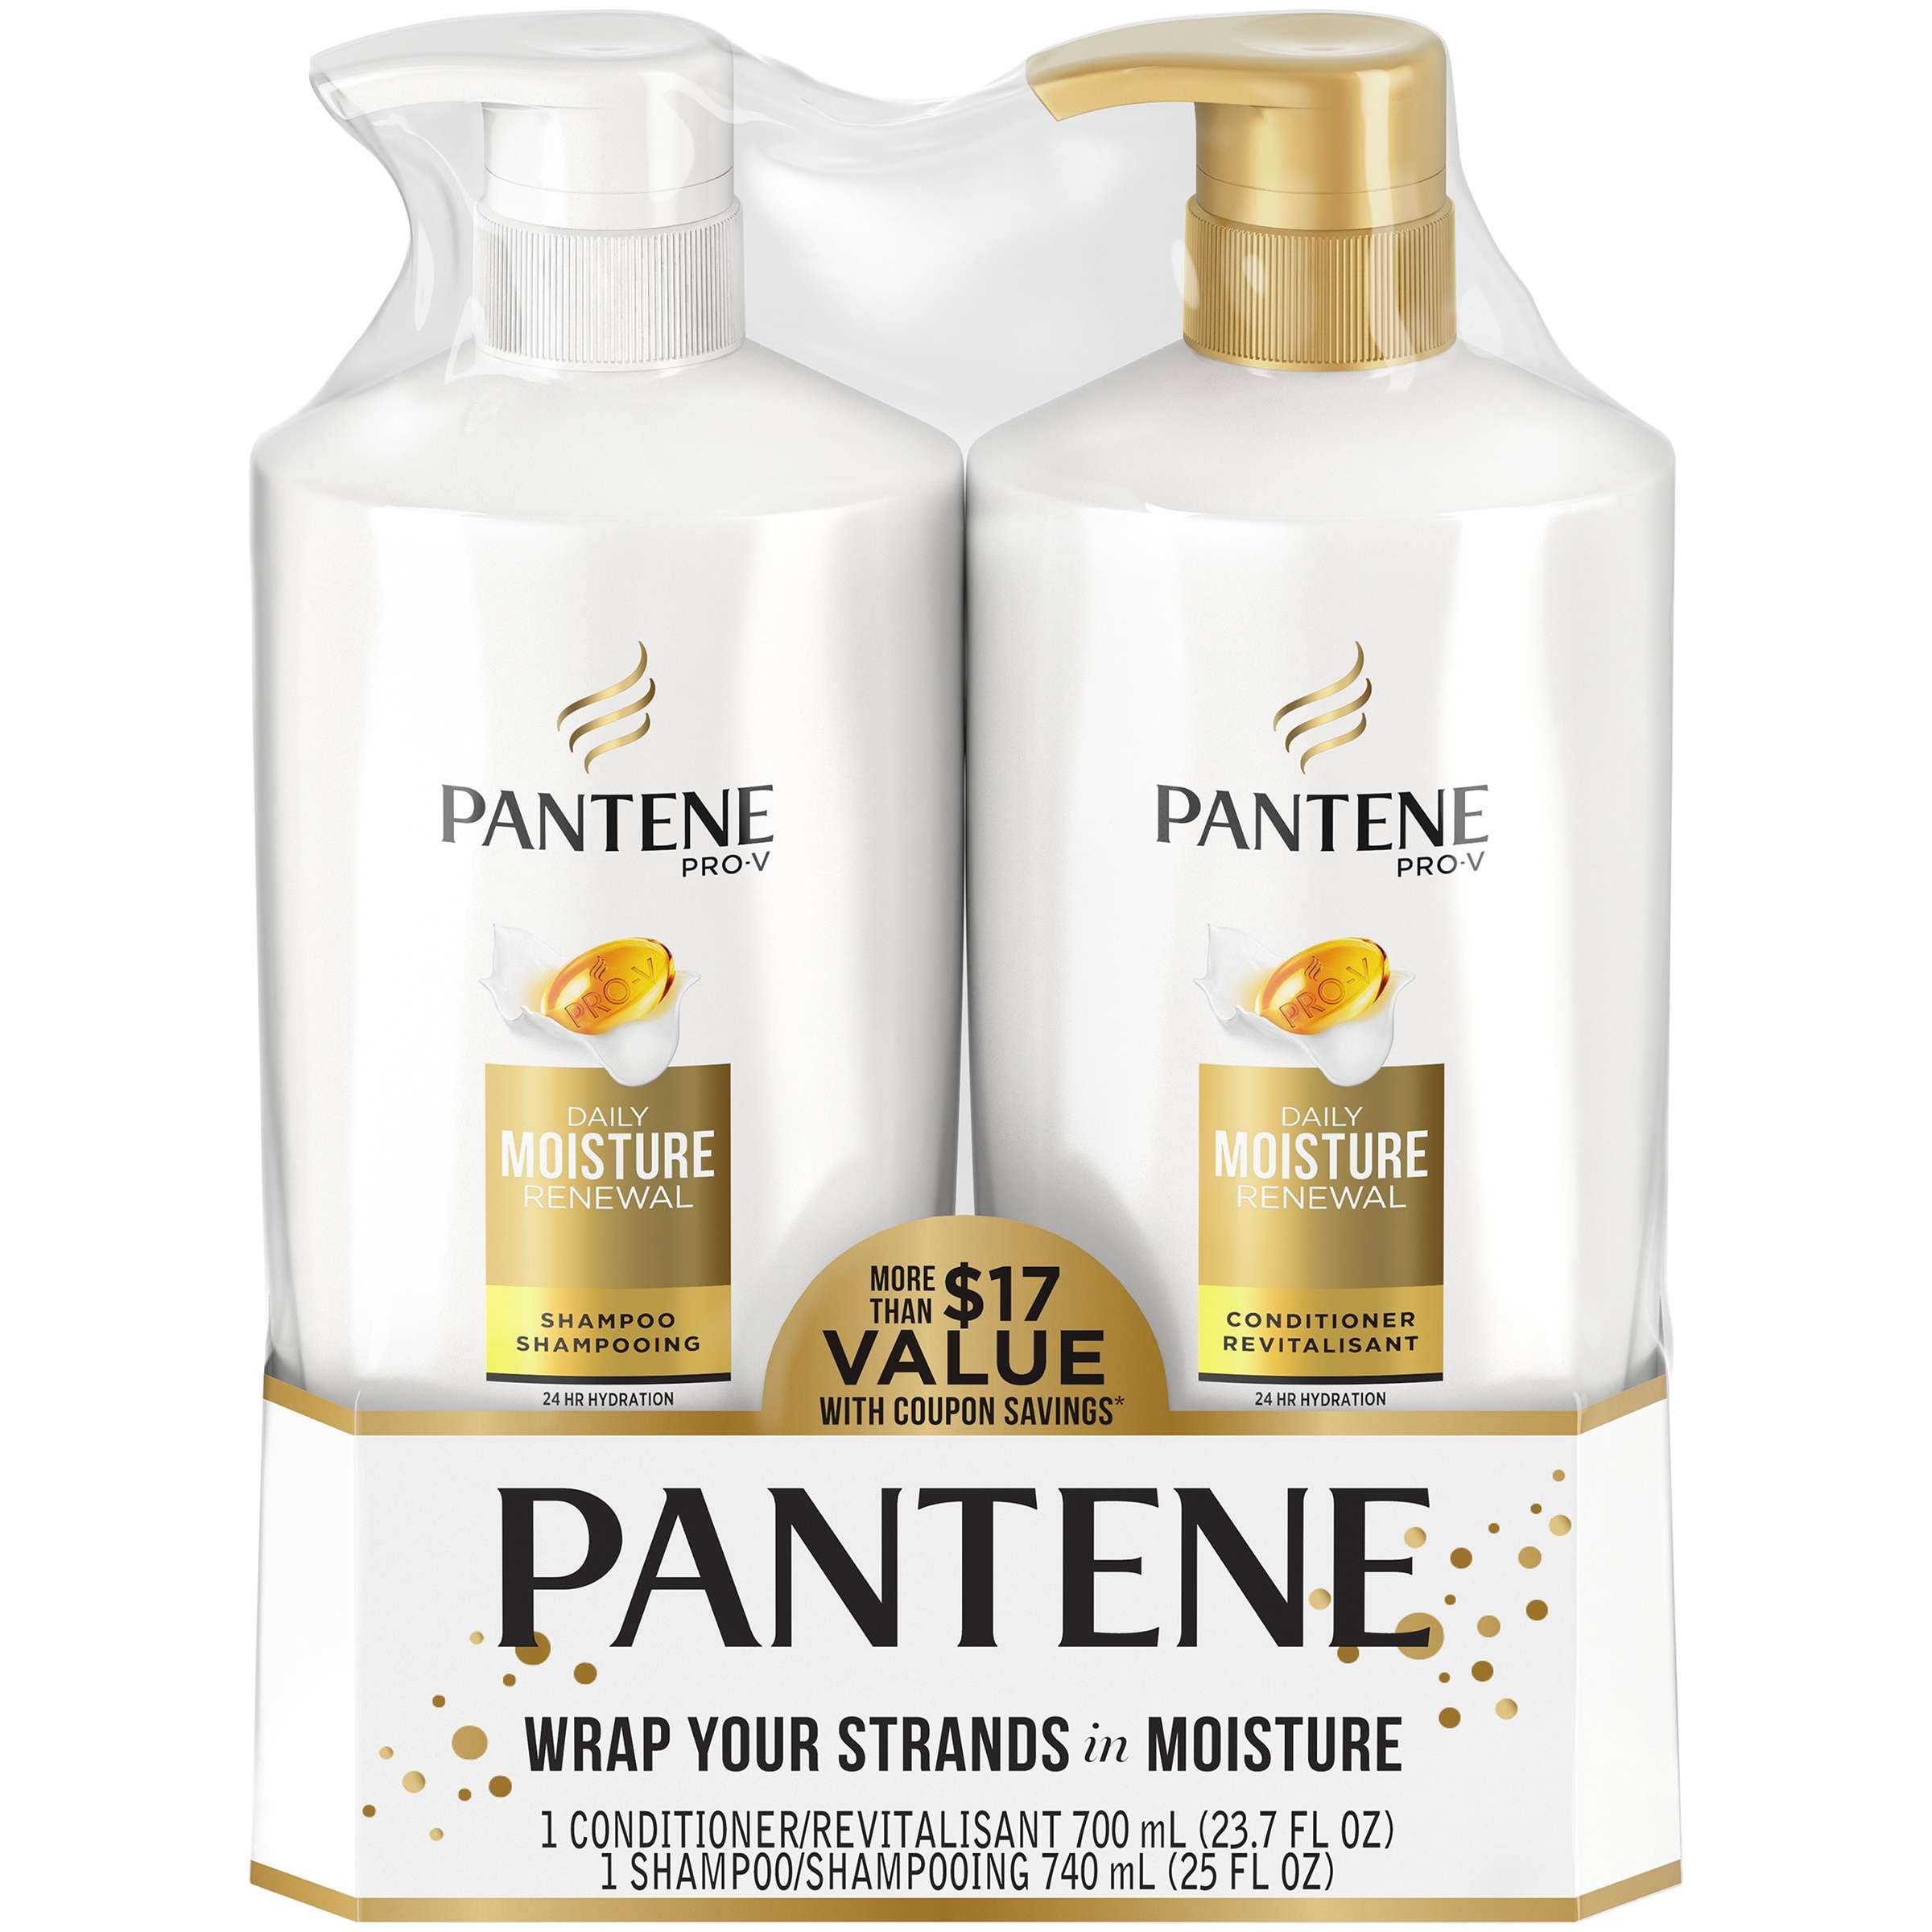 Pantene Pro-V Daily Moisture Renewal Shampoo and Conditioner Dual Pack, 48.7 fl oz - image 4 of 6